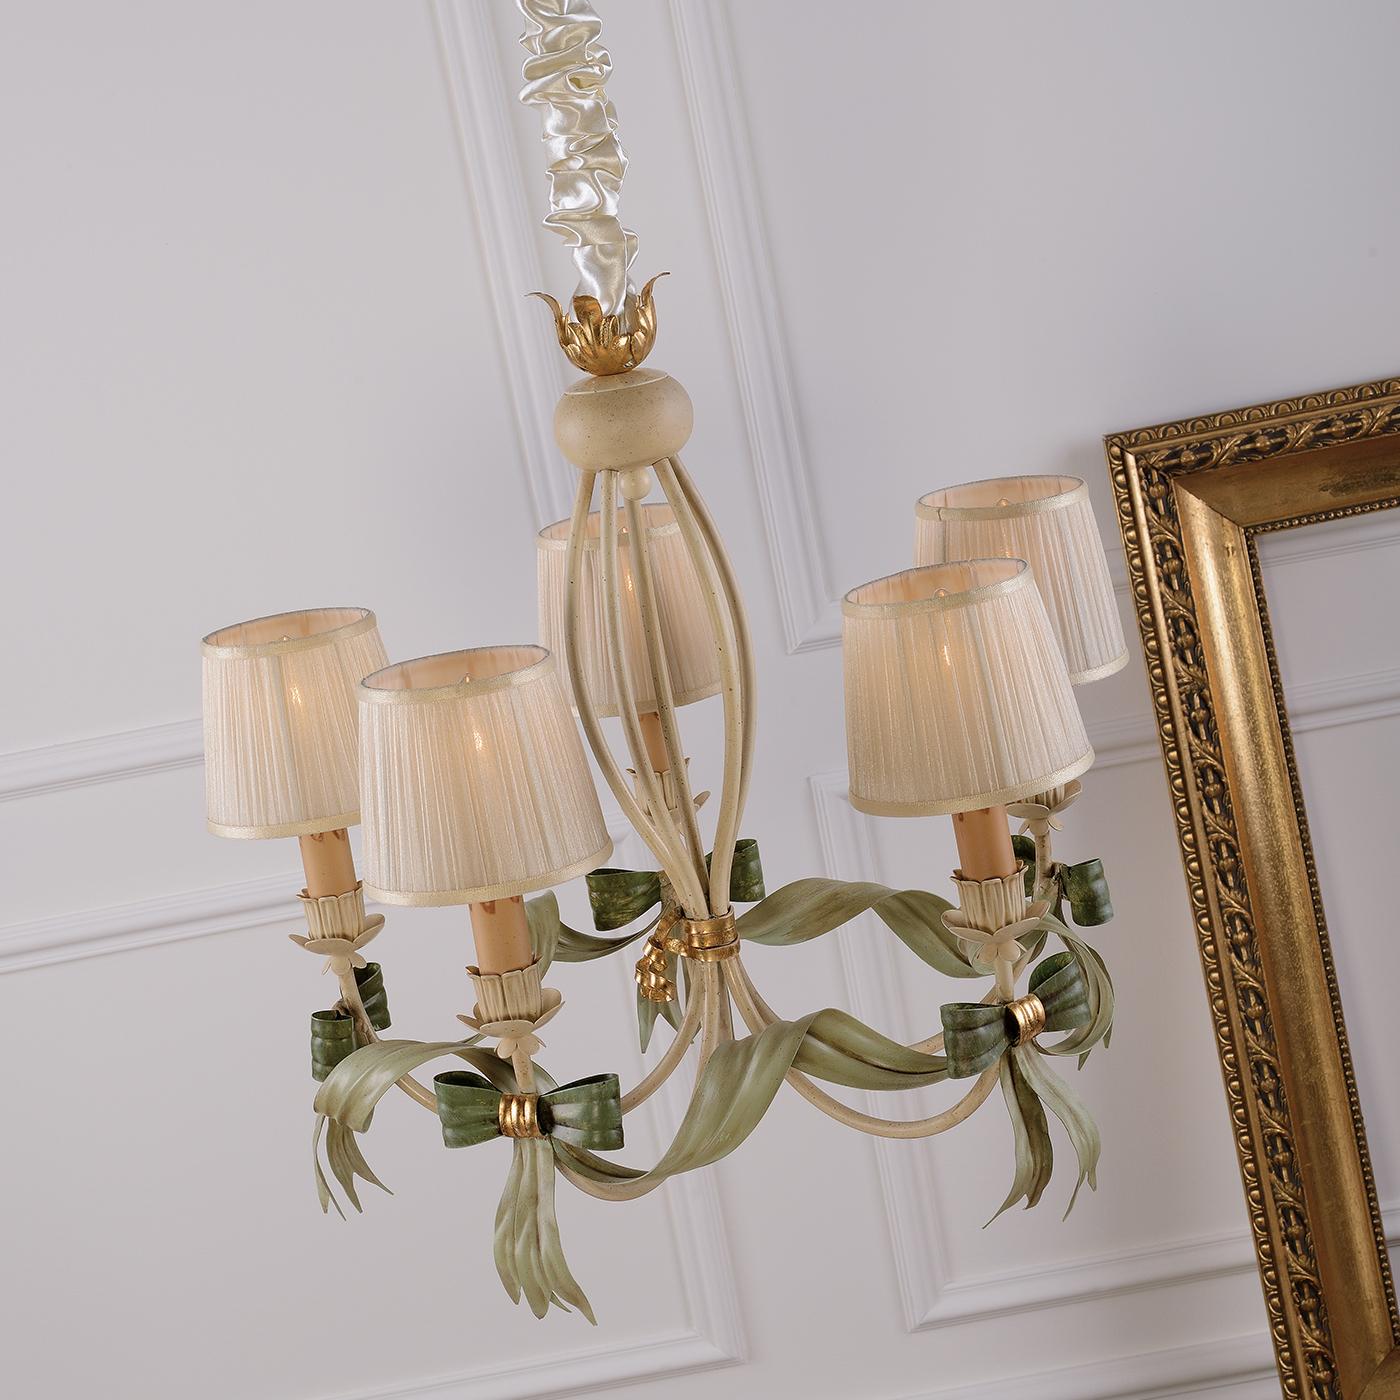 It will be hard not to notice this charming chandelier with five ivory-covered organza lampshades forming the body of the fixture. The metal details have been hand-decorated, including gold leaf accents, and a single green metal ribbon is tied